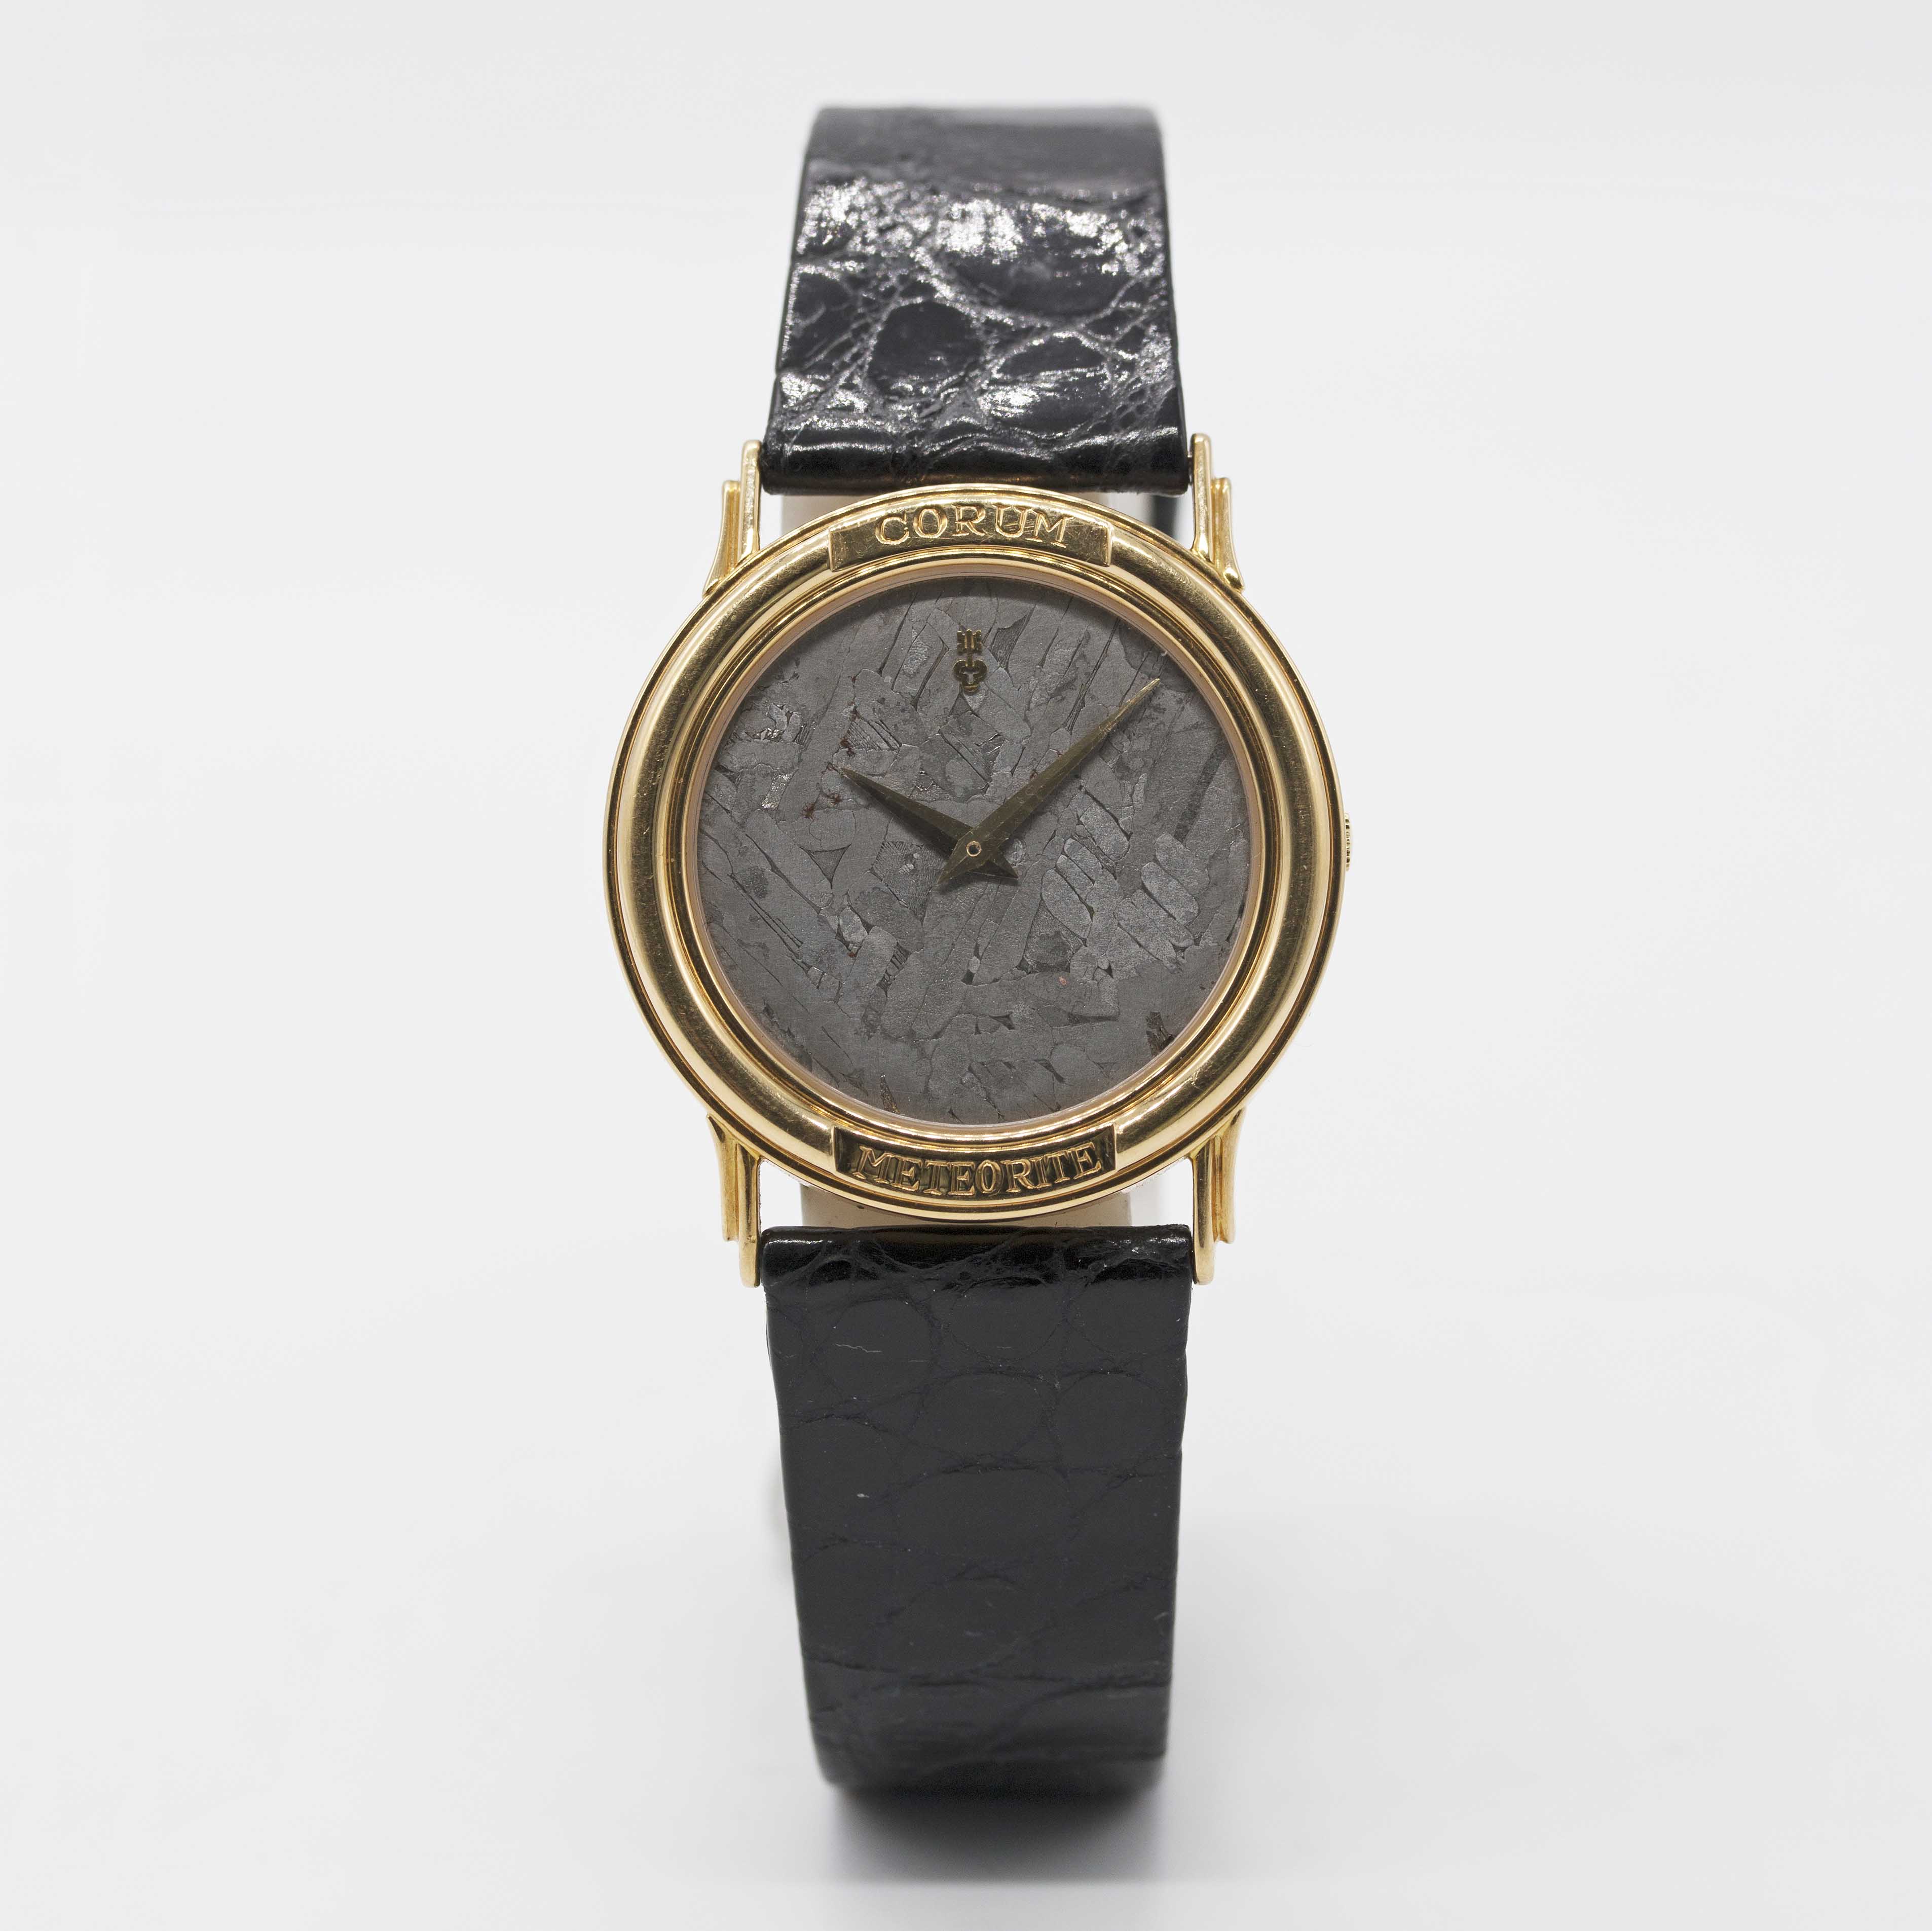 AN 18K SOLID YELLOW GOLD CORUM METEORITE WRIST WATCH CIRCA 1990s, REF. 50450-56 WITH "METEORITE DIAL - Image 2 of 8